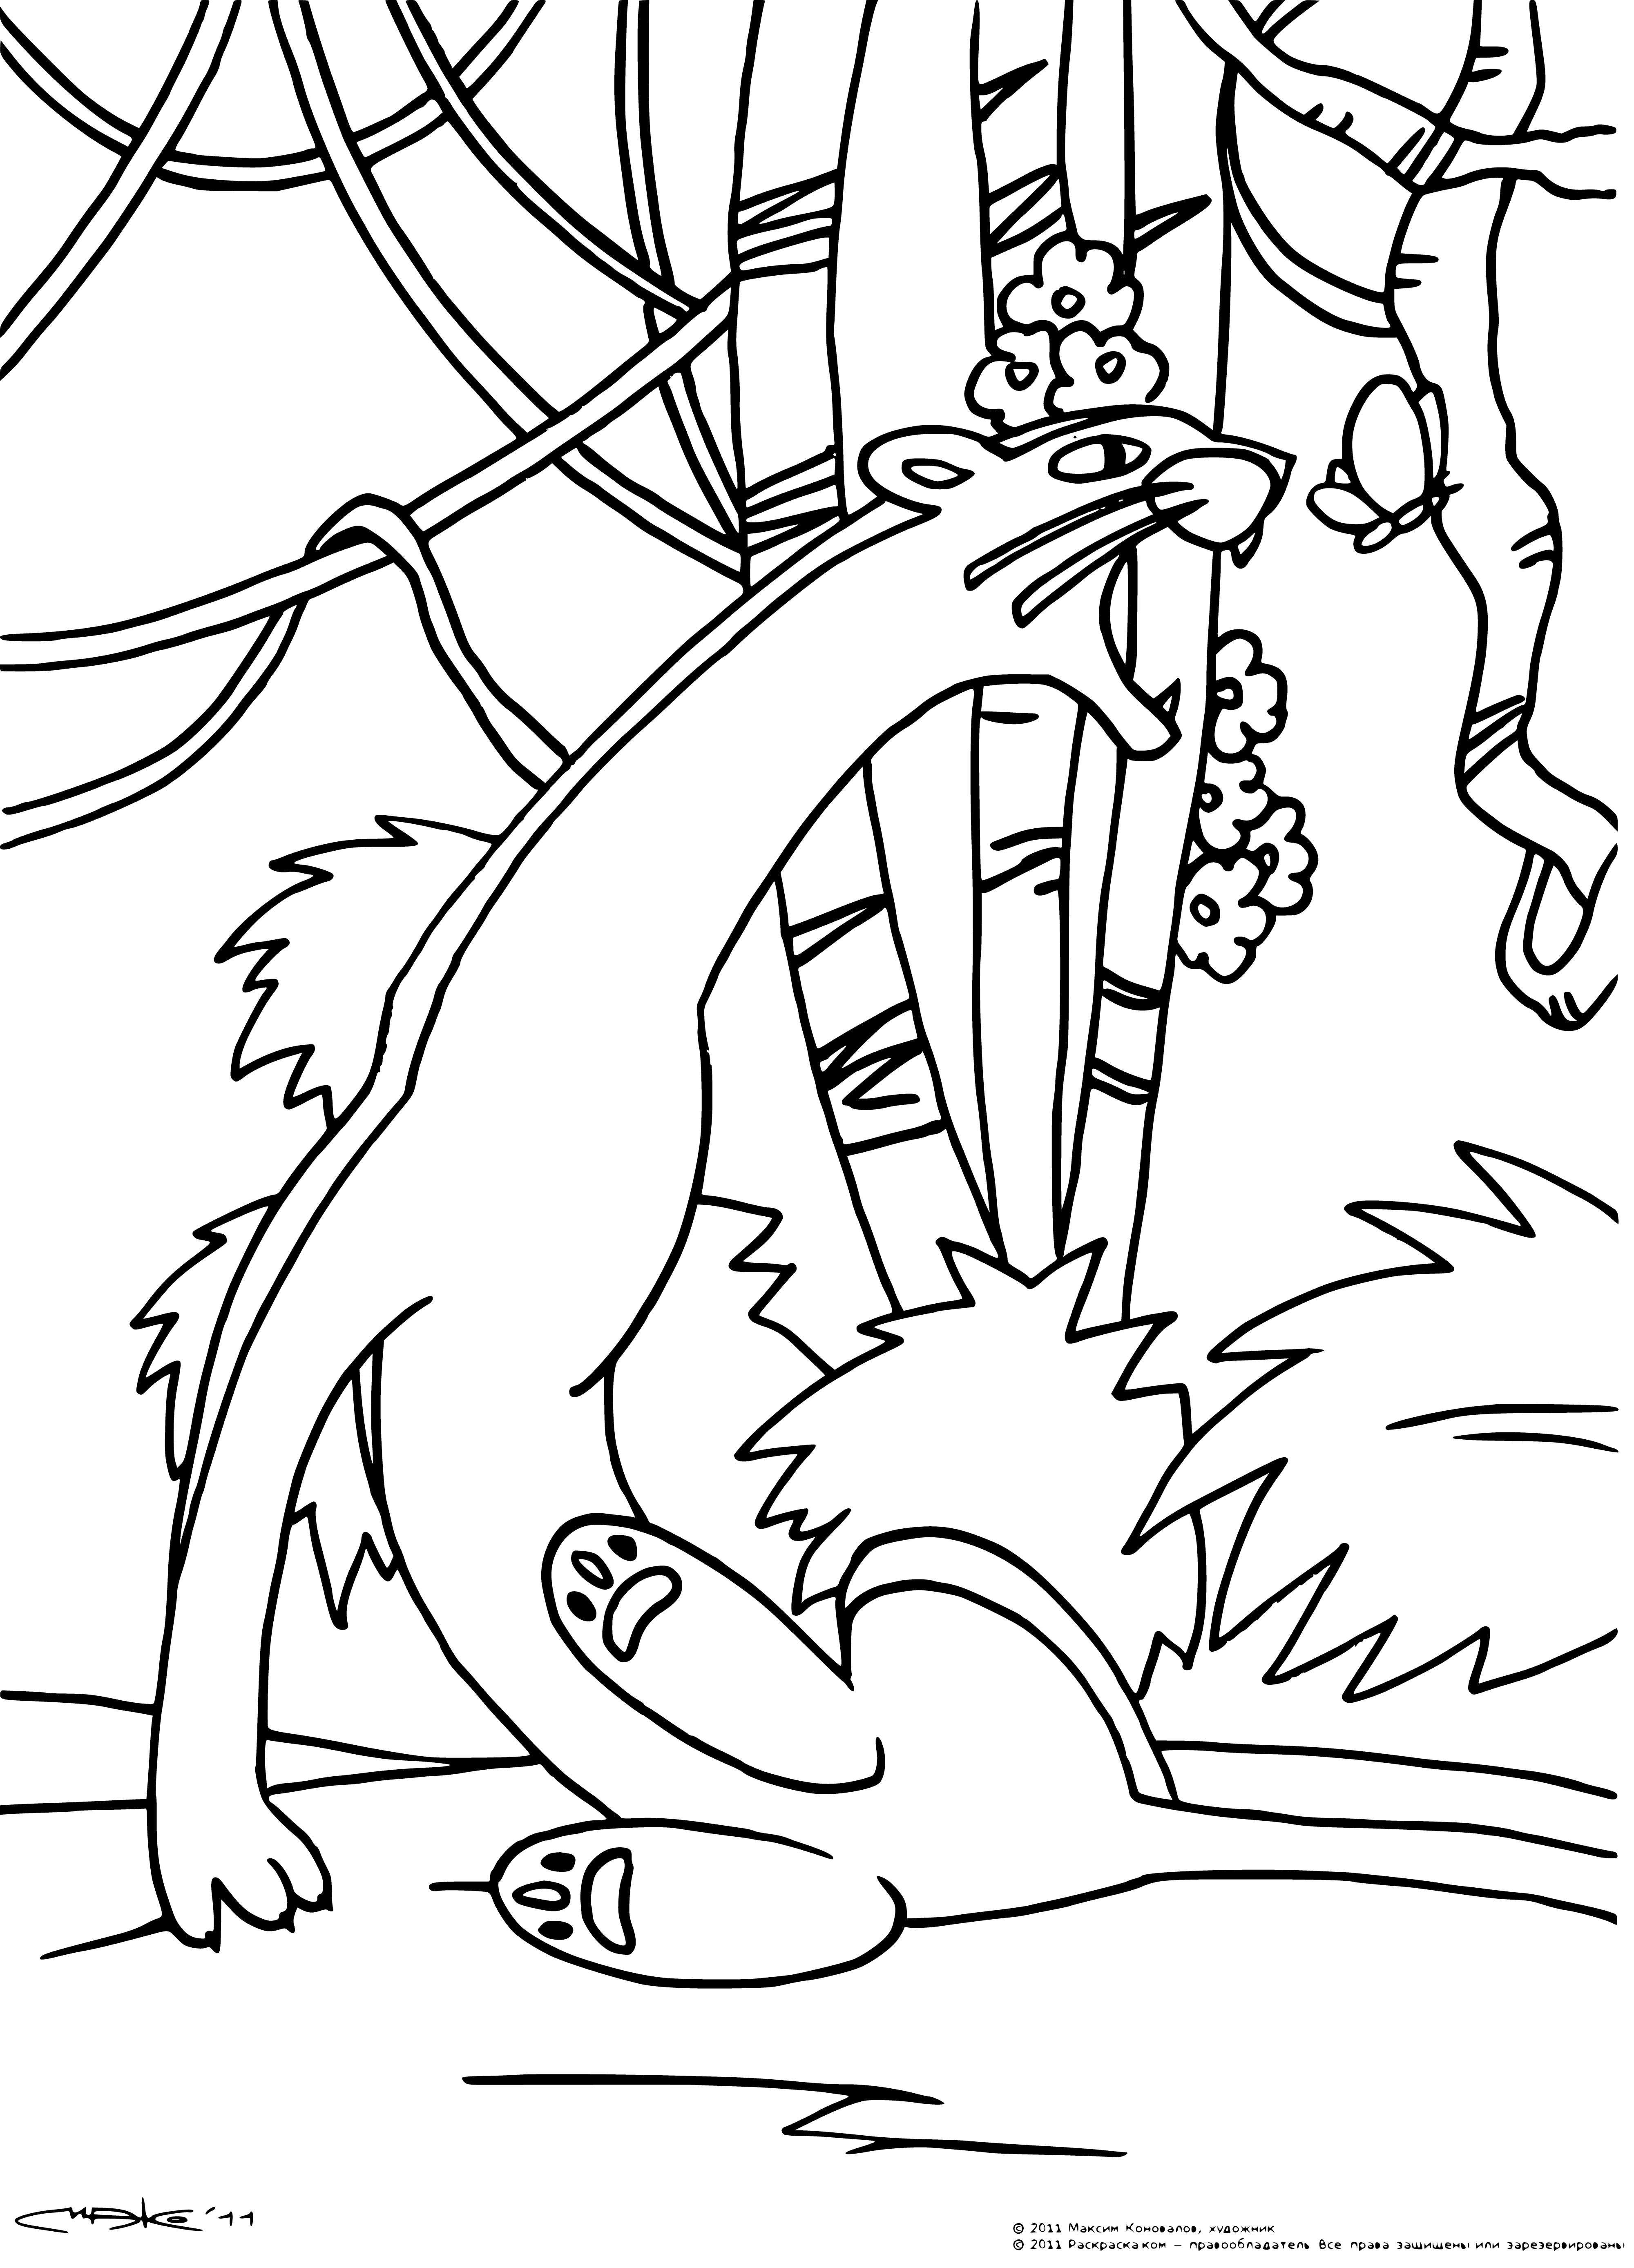 coloring page: A powerful black panther snarls in an aggressive stance, ready to attack, in a jungle of vines & plants.